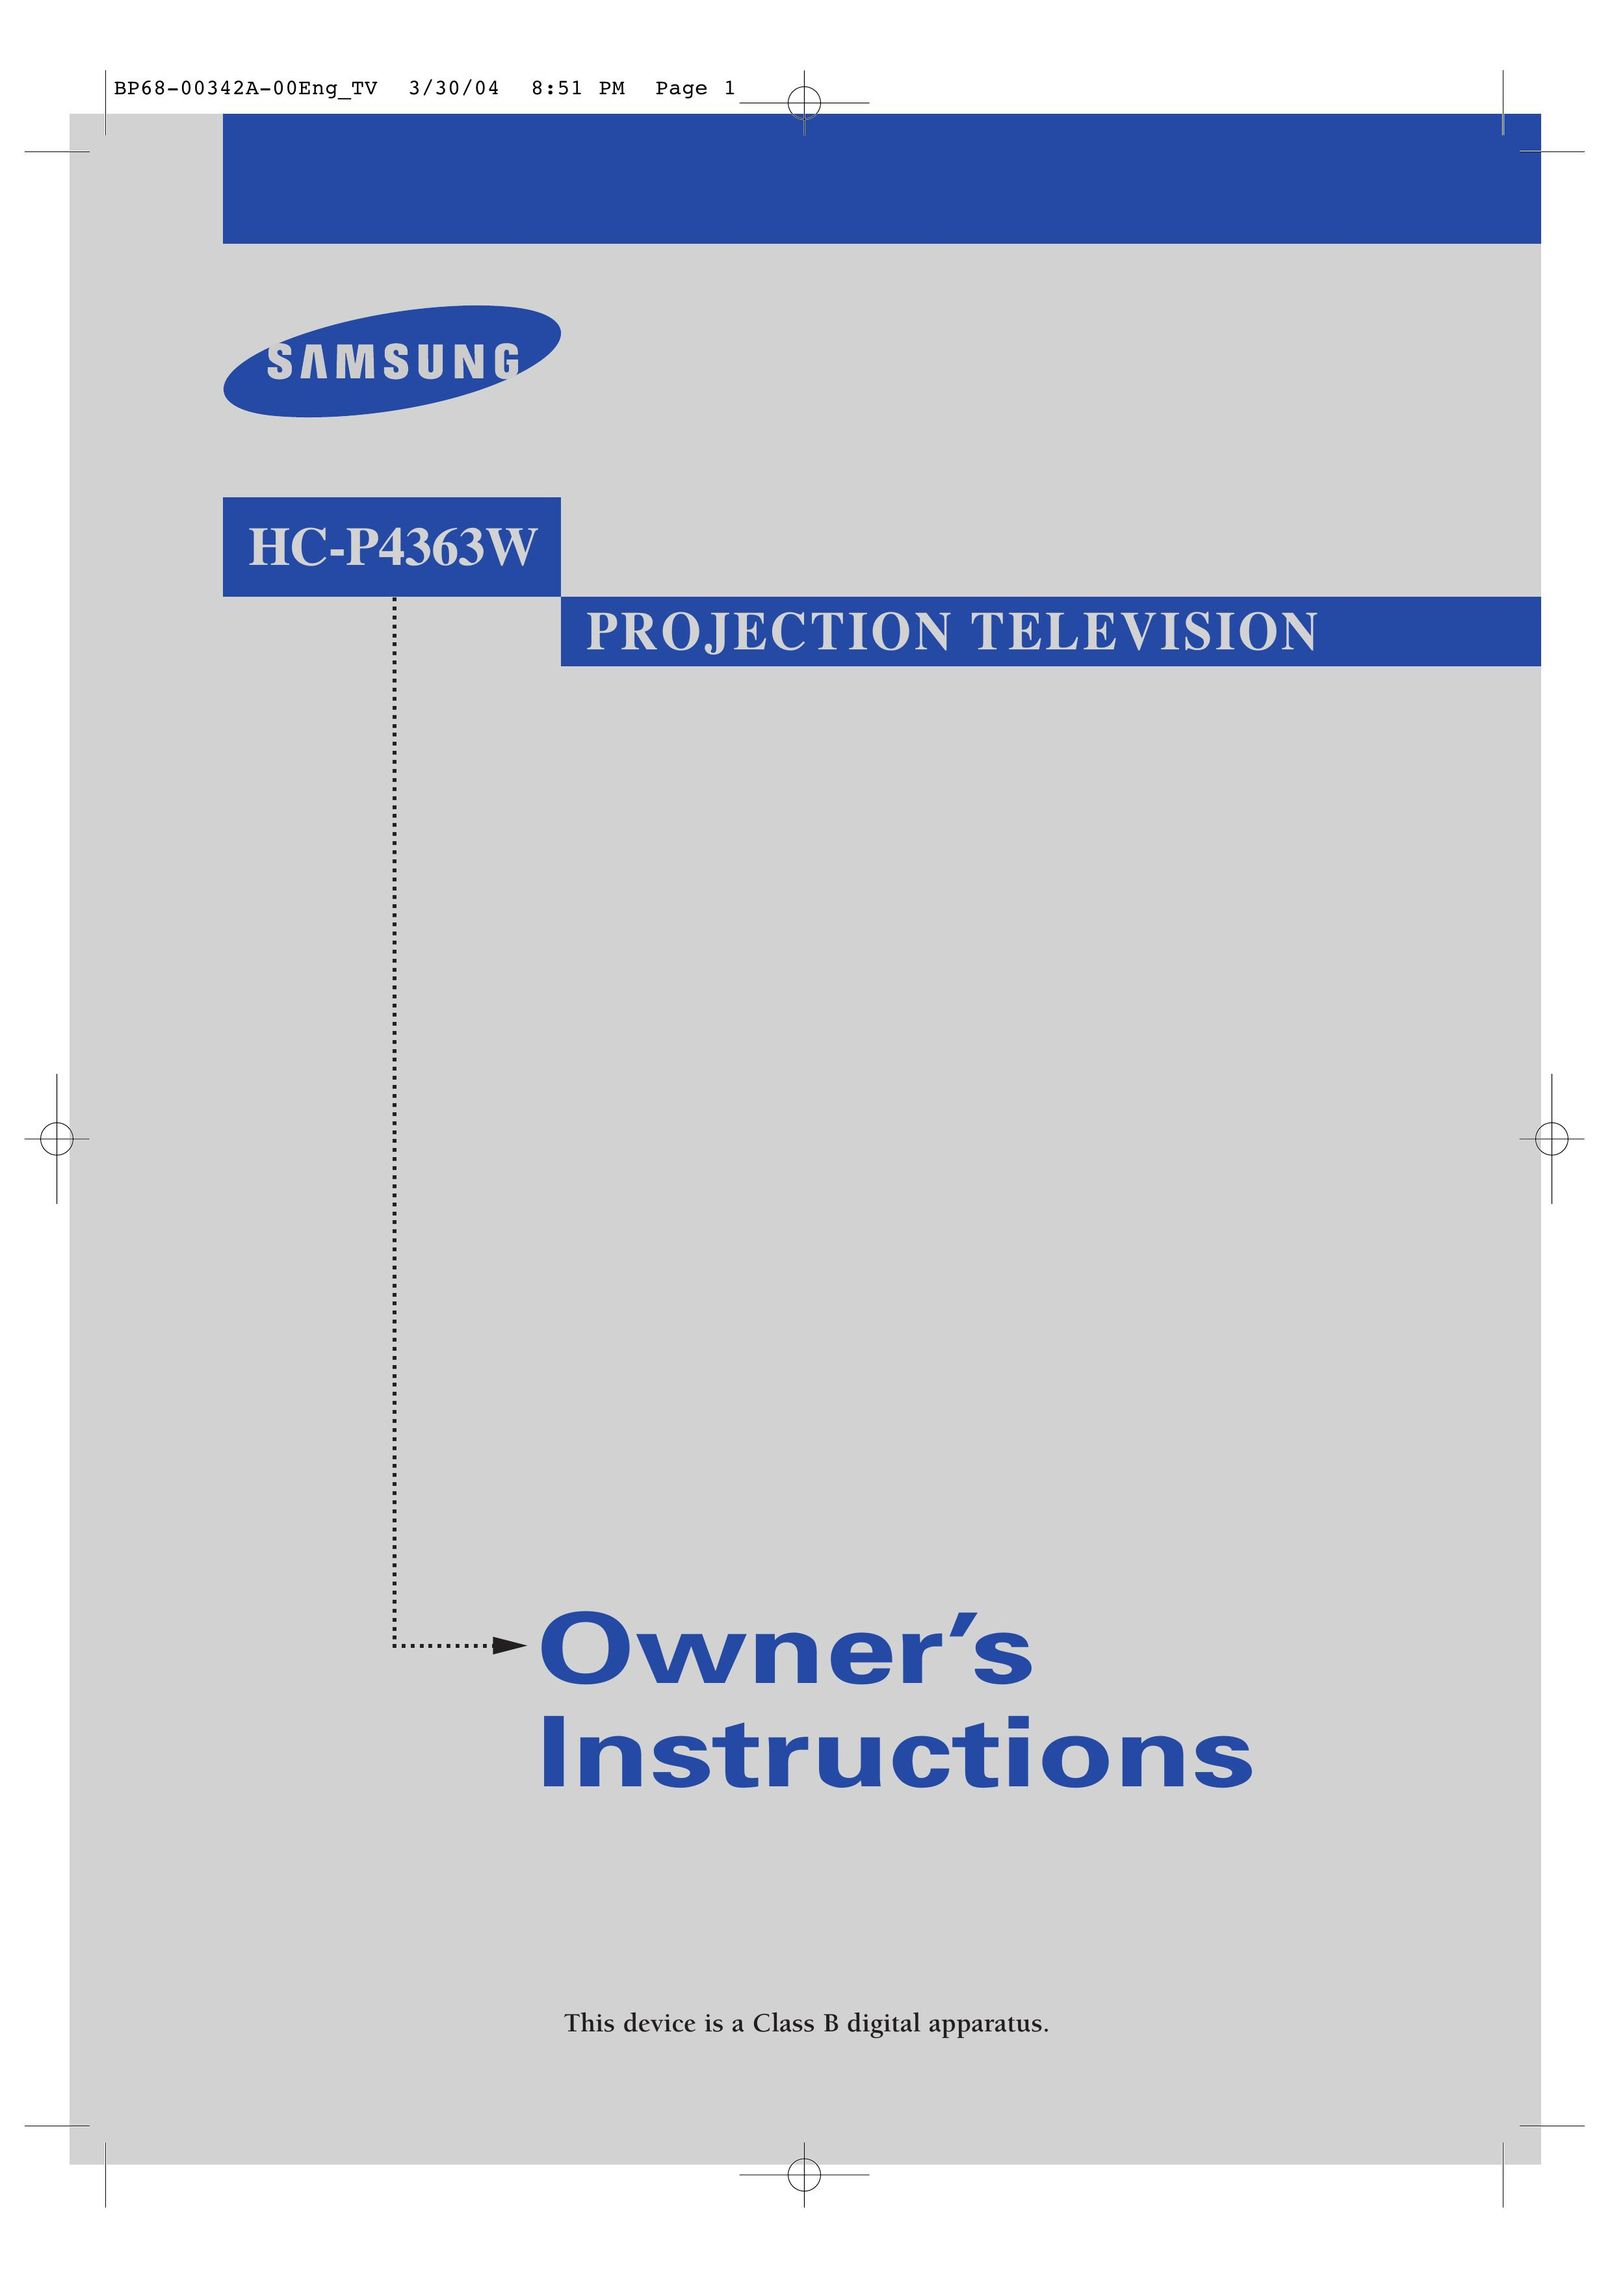 Samsung HC-P4363W Projection Television User Manual